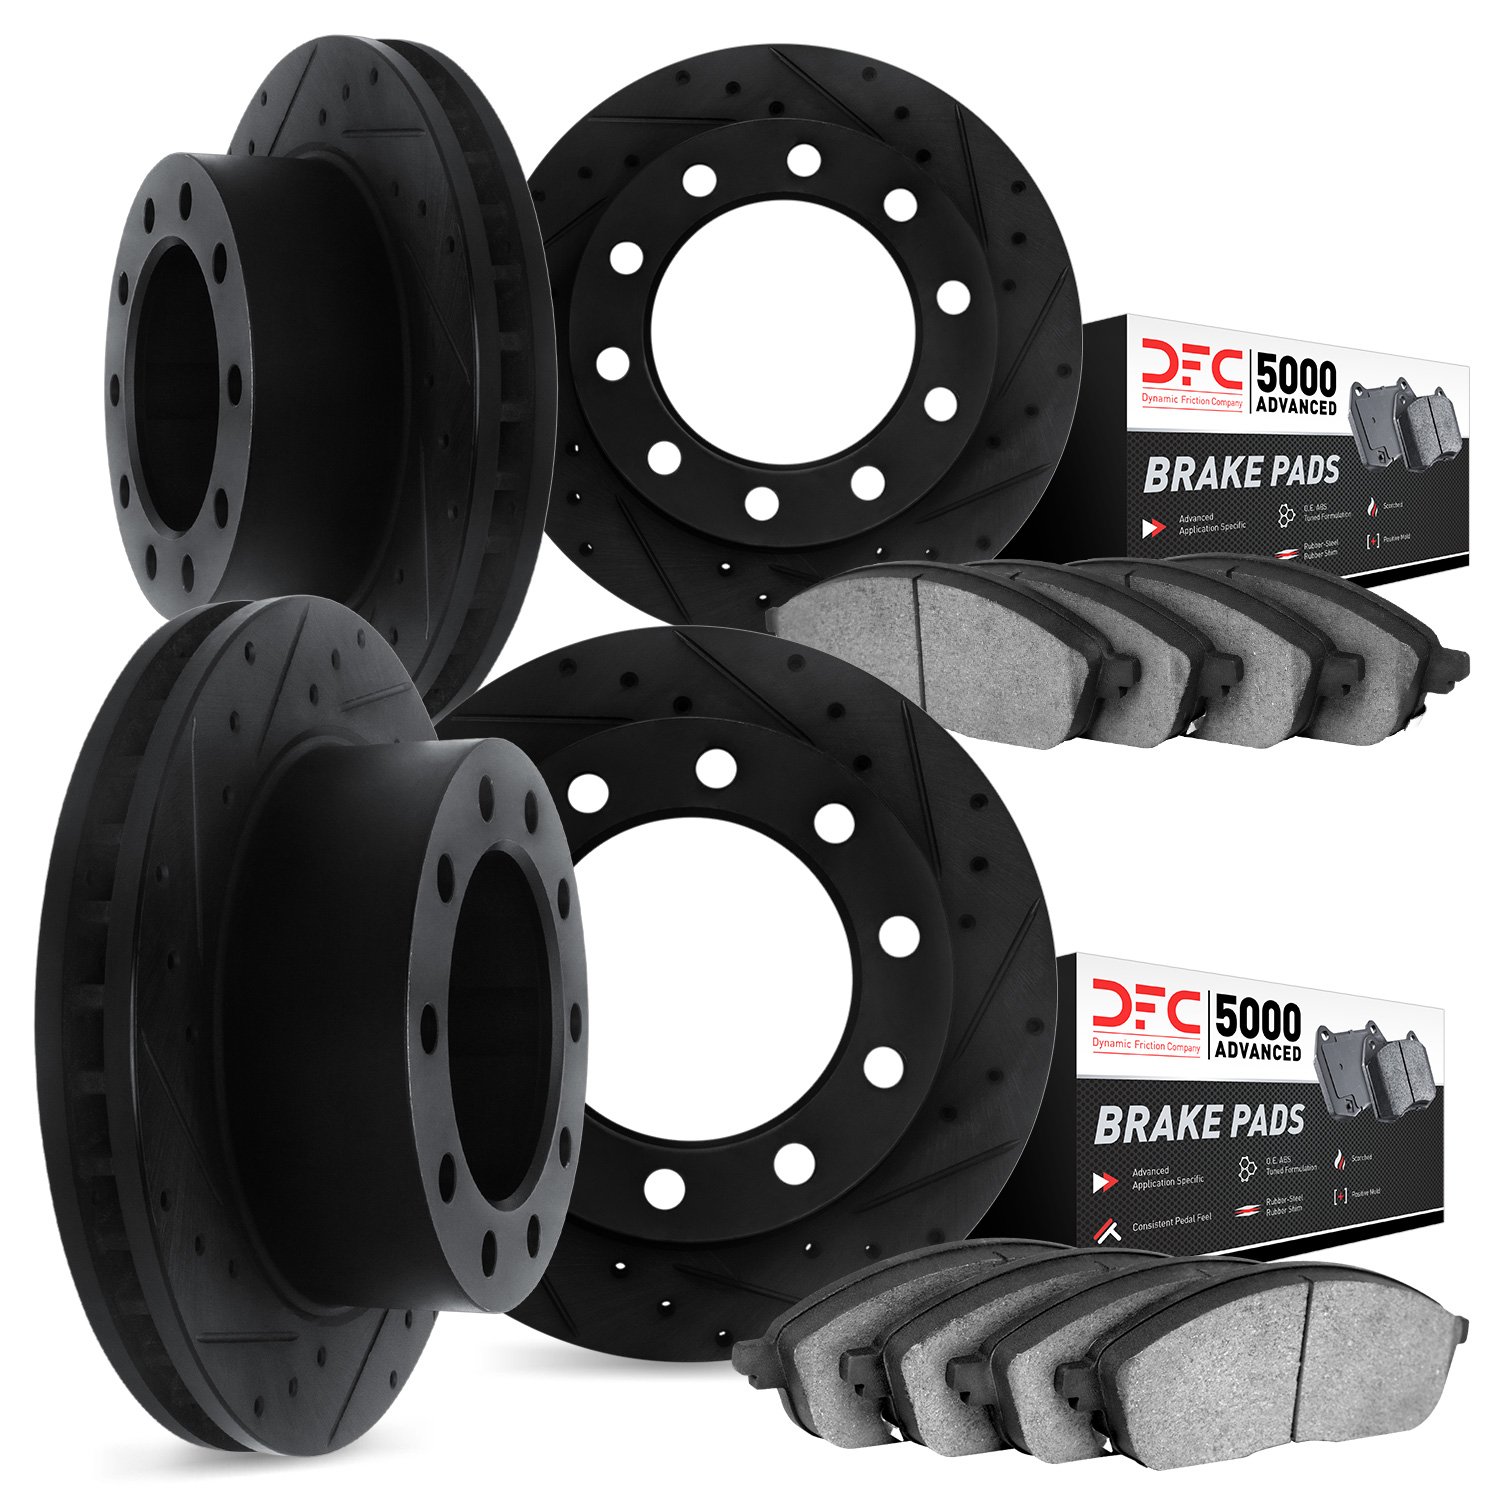 8504-99741 Drilled/Slotted Brake Rotors w/5000 Advanced Brake Pads Kit [Black], Fits Select Multiple Makes/Models, Position: Fro